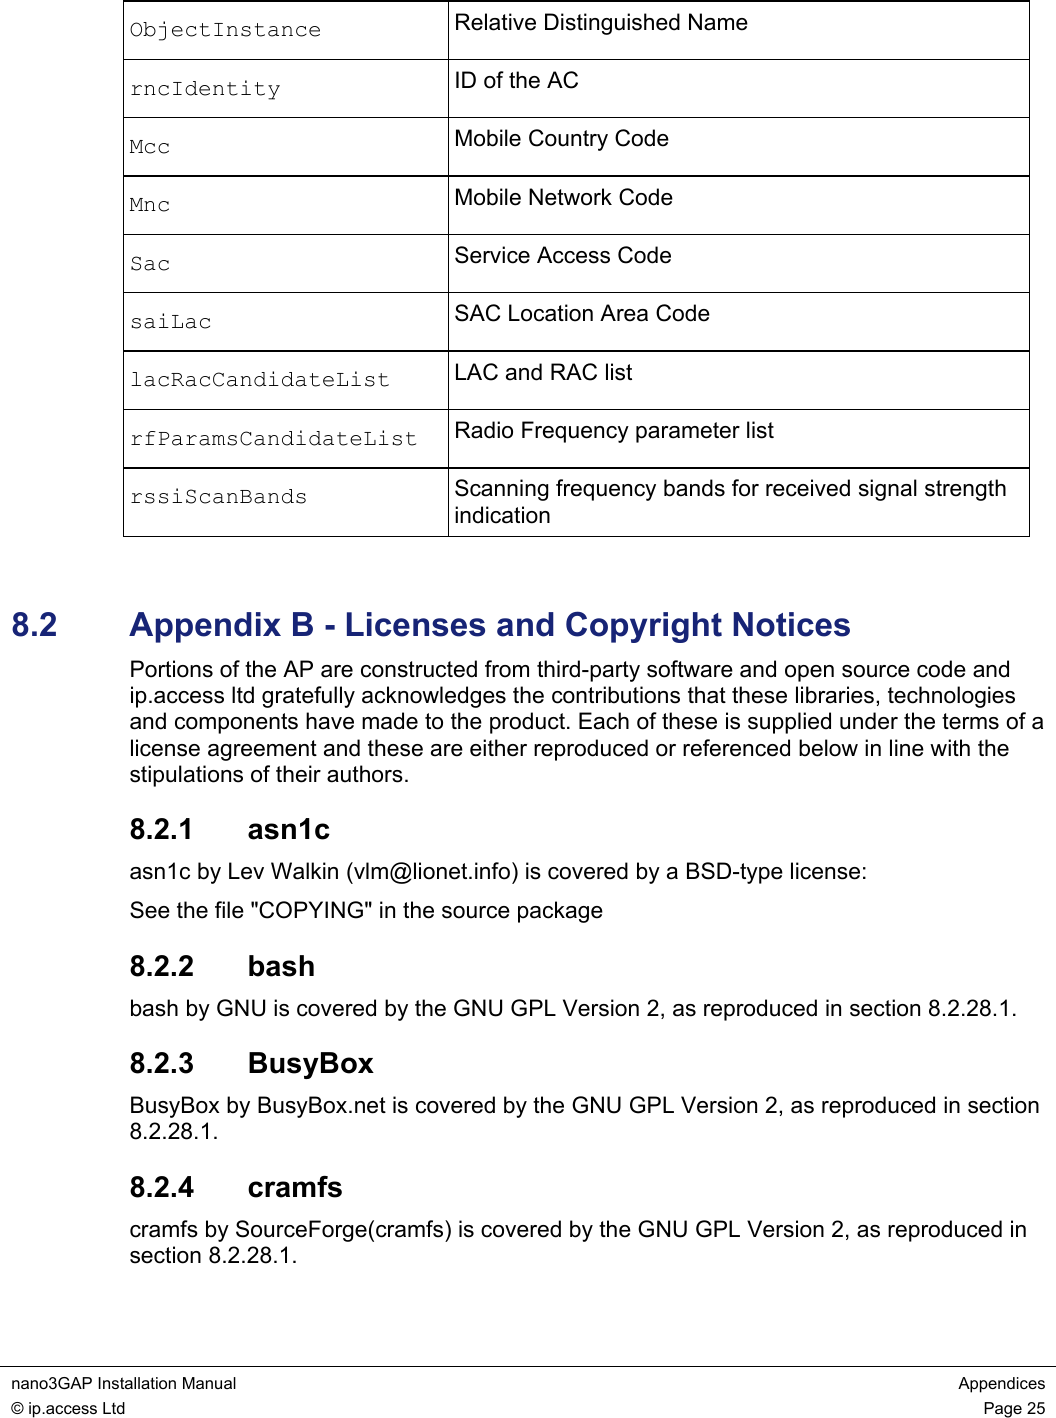  nano3GAP Installation Manual  Appendices © ip.access Ltd  Page 25  ObjectInstance  Relative Distinguished Name rncIdentity  ID of the AC Mcc  Mobile Country Code Mnc  Mobile Network Code Sac  Service Access Code saiLac  SAC Location Area Code lacRacCandidateList  LAC and RAC list rfParamsCandidateList  Radio Frequency parameter list rssiScanBands  Scanning frequency bands for received signal strength indication  8.2  Appendix B - Licenses and Copyright Notices Portions of the AP are constructed from third-party software and open source code and ip.access ltd gratefully acknowledges the contributions that these libraries, technologies and components have made to the product. Each of these is supplied under the terms of a license agreement and these are either reproduced or referenced below in line with the stipulations of their authors. 8.2.1  asn1c asn1c by Lev Walkin (vlm@lionet.info) is covered by a BSD-type license: See the file &quot;COPYING&quot; in the source package 8.2.2  bash bash by GNU is covered by the GNU GPL Version 2, as reproduced in section 8.2.28.1. 8.2.3  BusyBox BusyBox by BusyBox.net is covered by the GNU GPL Version 2, as reproduced in section 8.2.28.1. 8.2.4  cramfs cramfs by SourceForge(cramfs) is covered by the GNU GPL Version 2, as reproduced in section 8.2.28.1. 